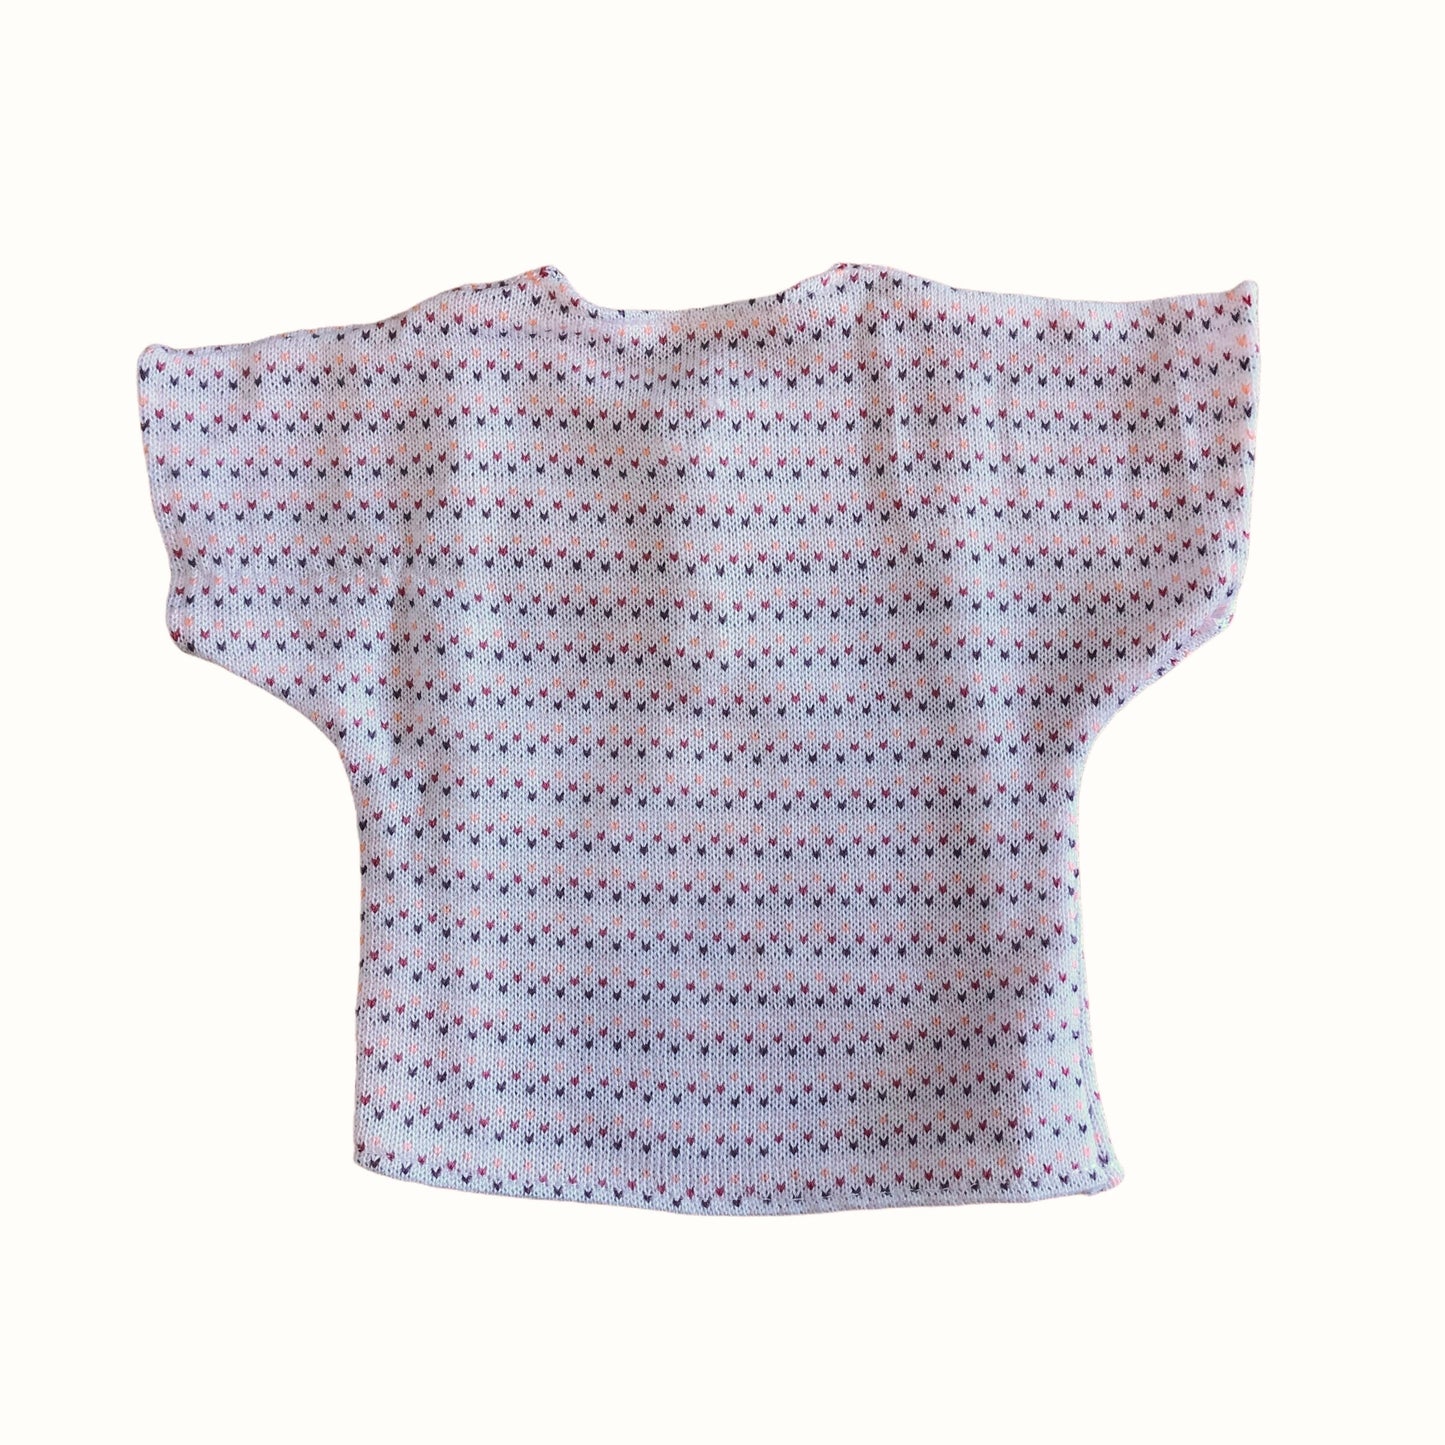 Vintage 1970s Knitted Top French Made 3-6 Months